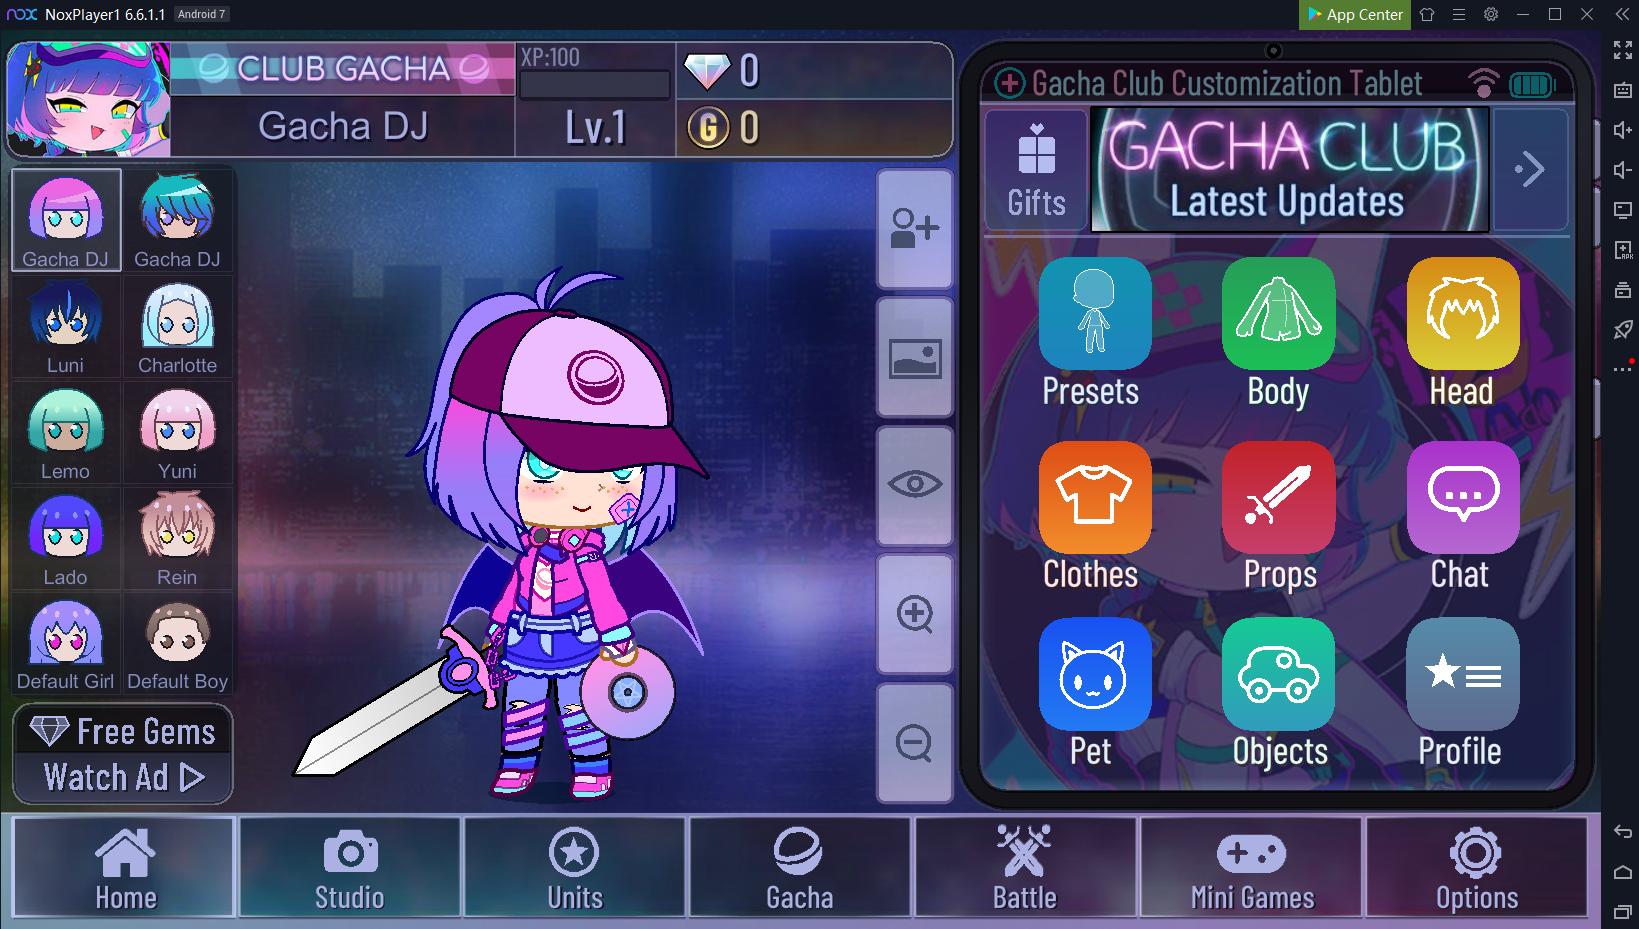 Download and Play Gacha Club on PC with NoxPlayer NoxPlayer